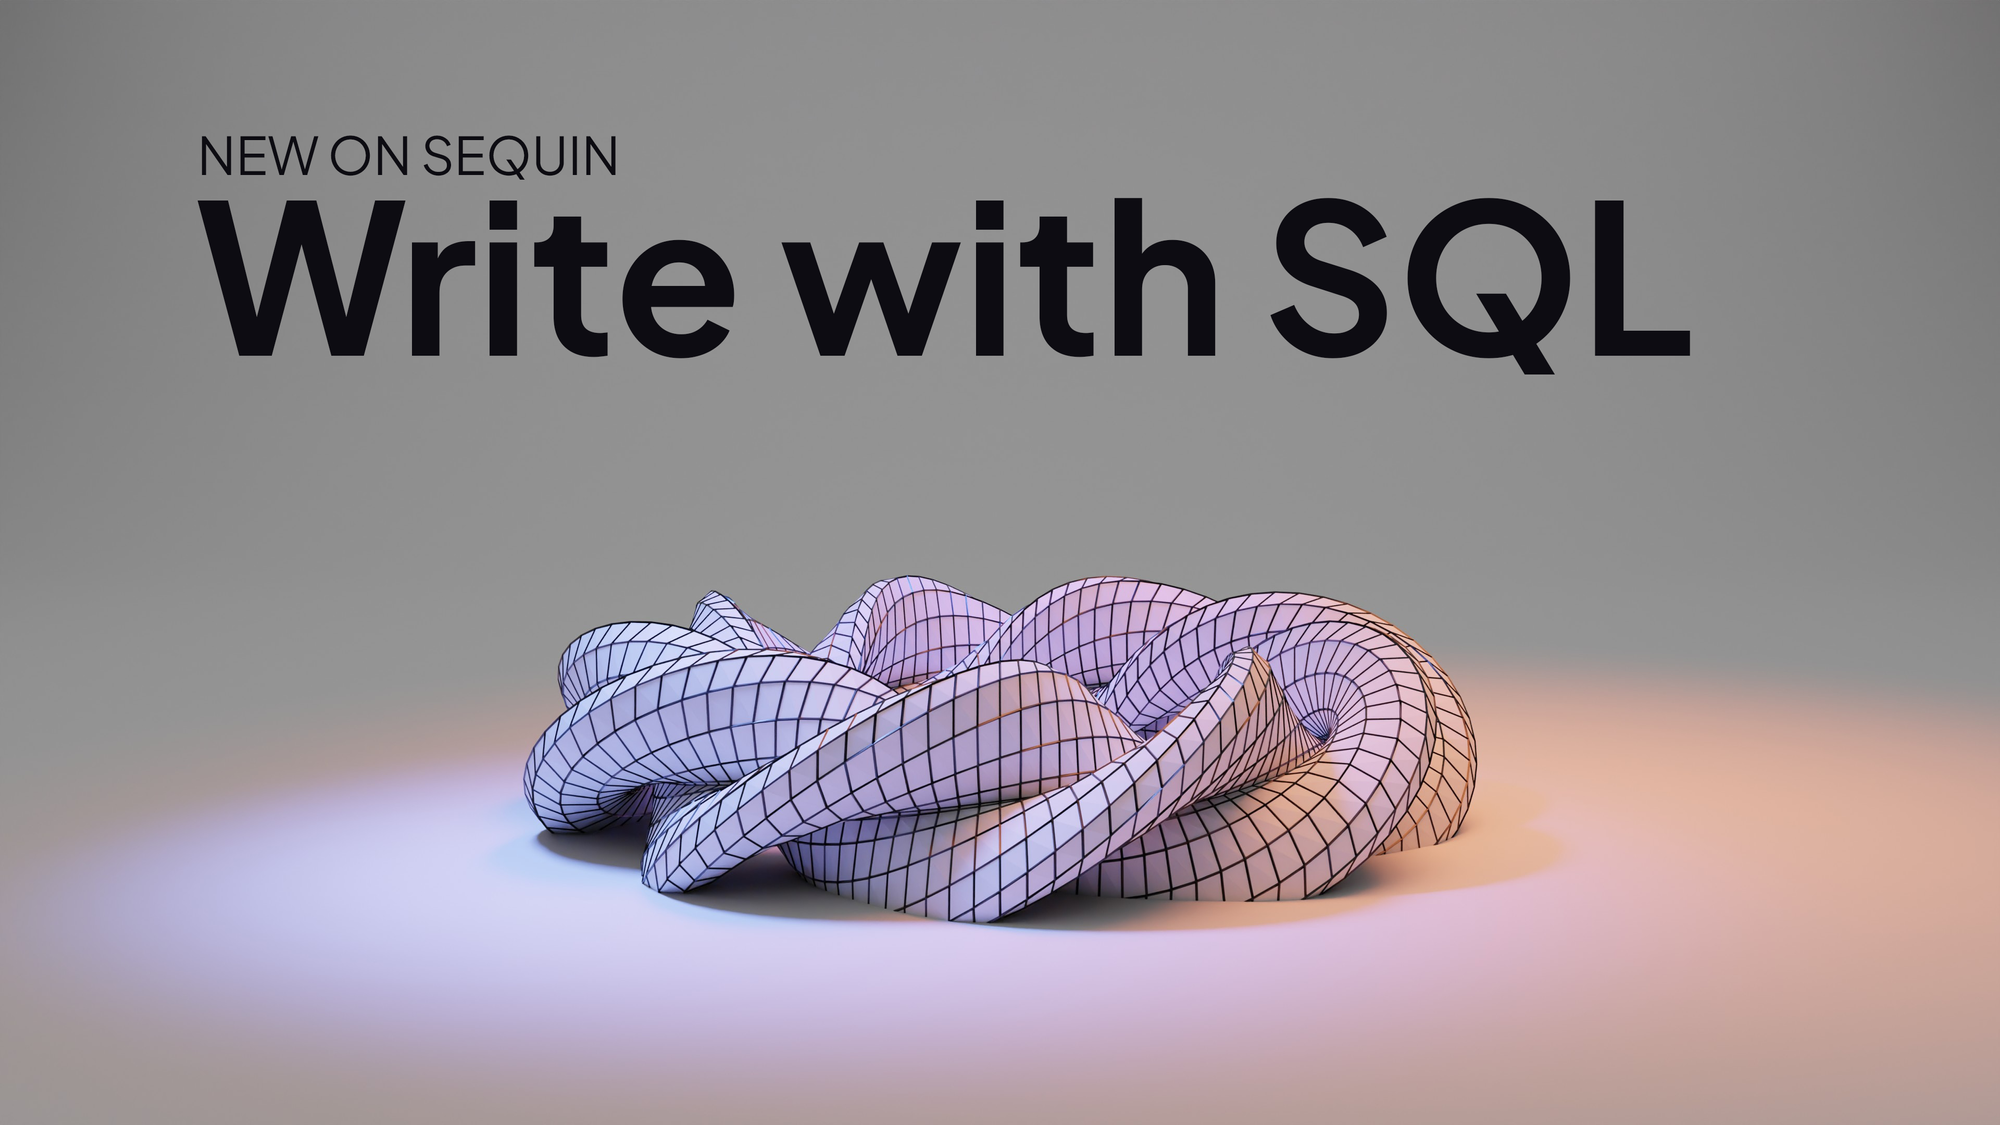 Announcing SQL writes: Write data back to APIs using SQL in your database, synchronously